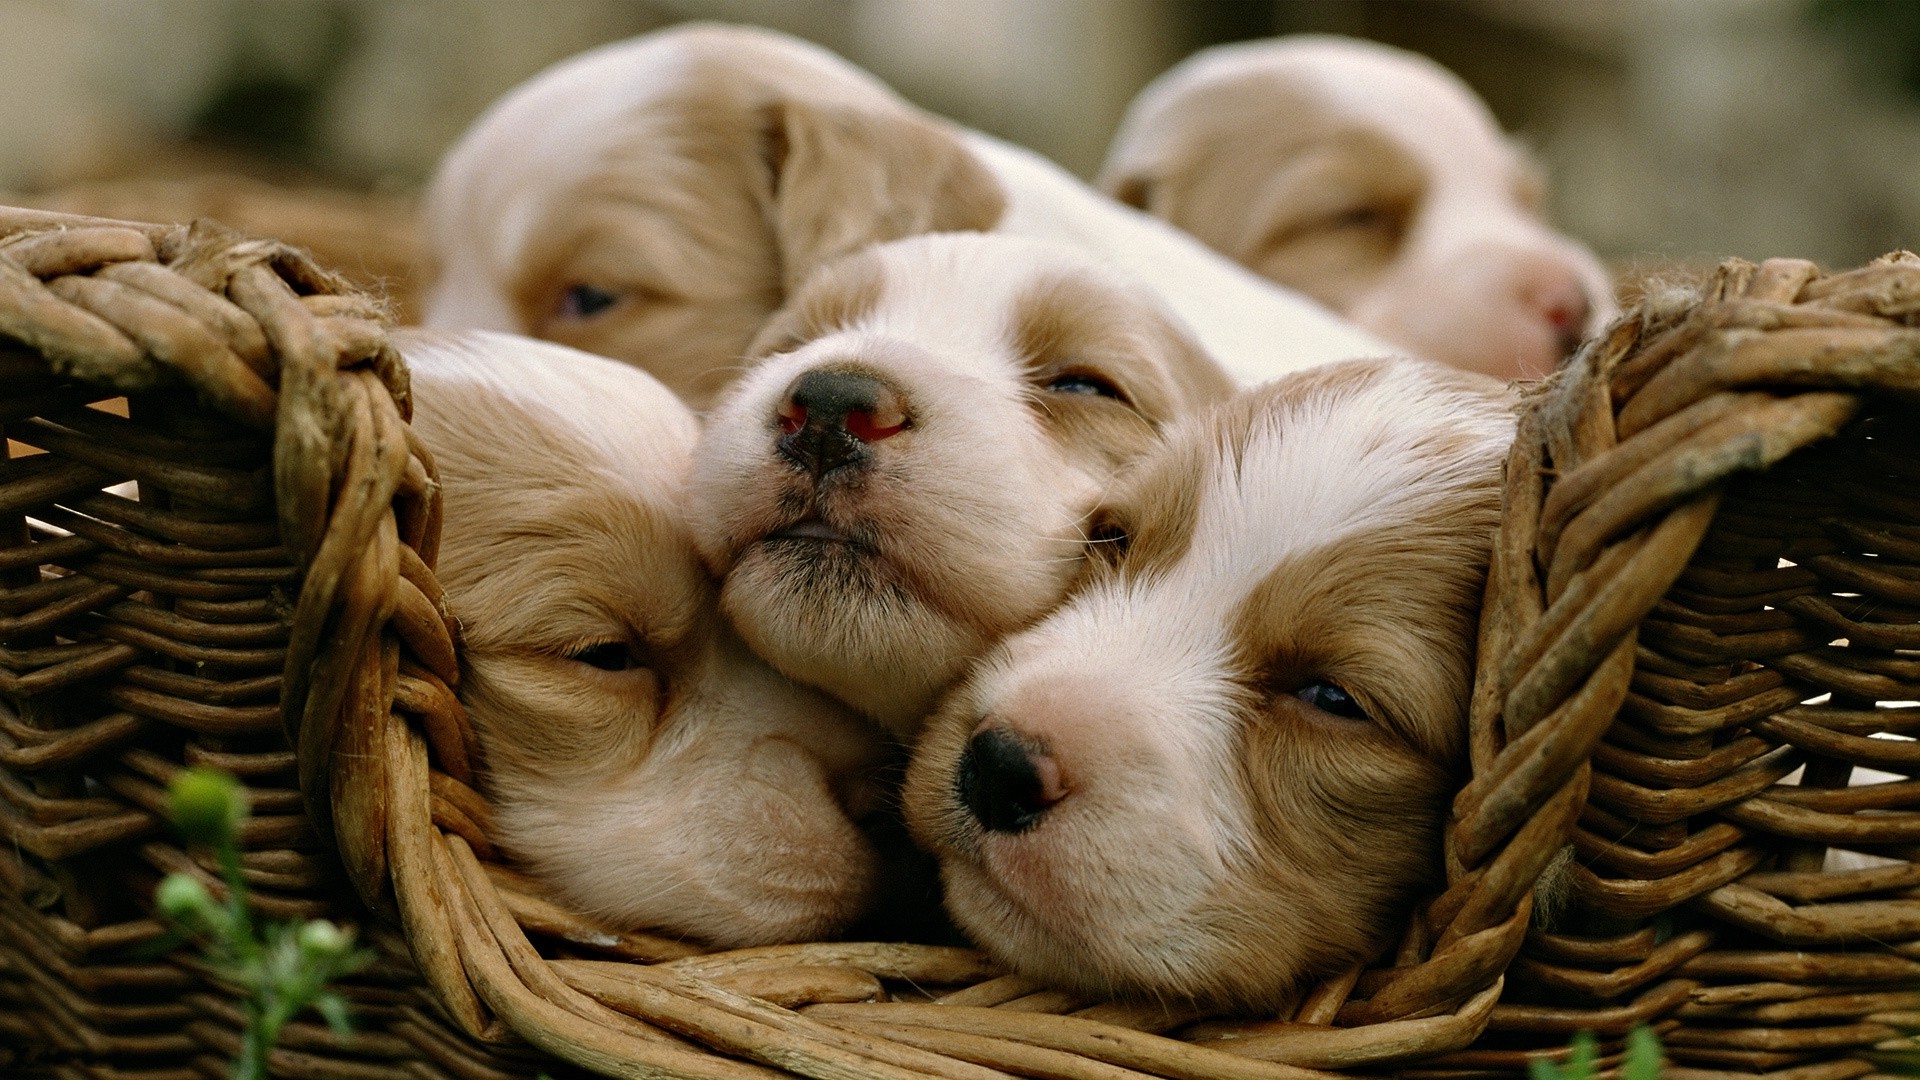 animals, Dog, Puppies, Baby Animals, Baskets Wallpapers HD